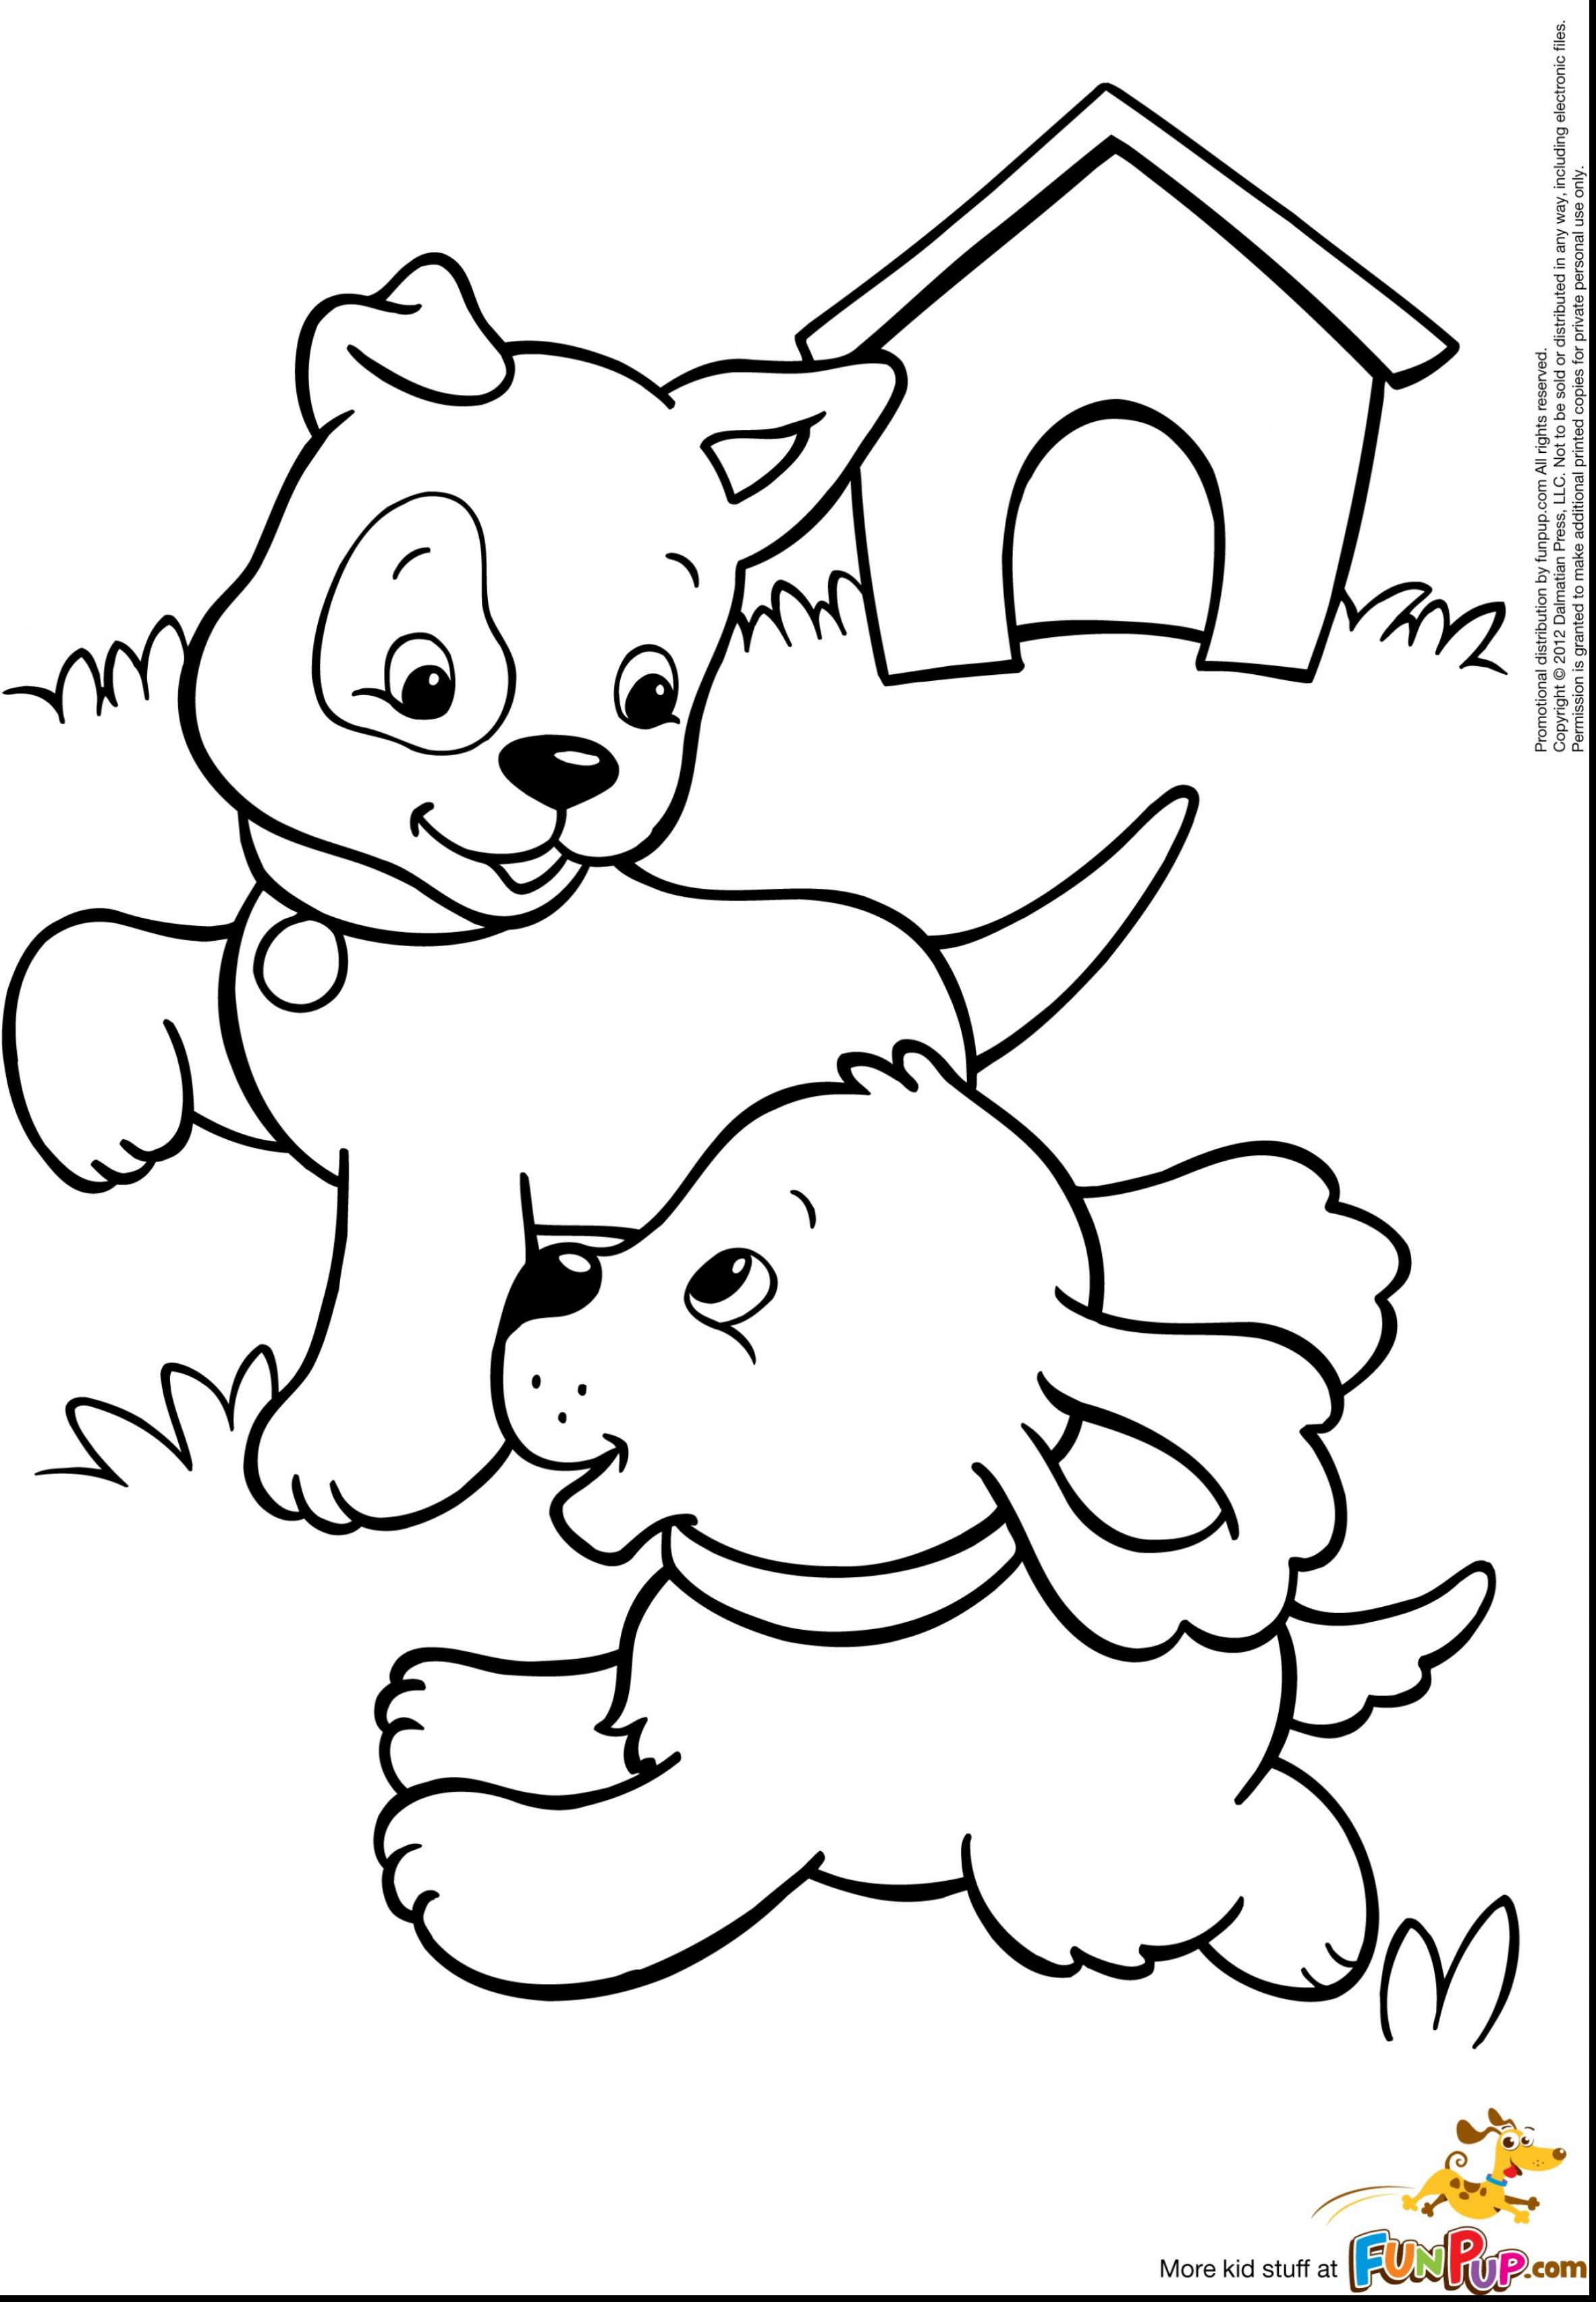 puppy drawing for kids at getdrawingscom free for